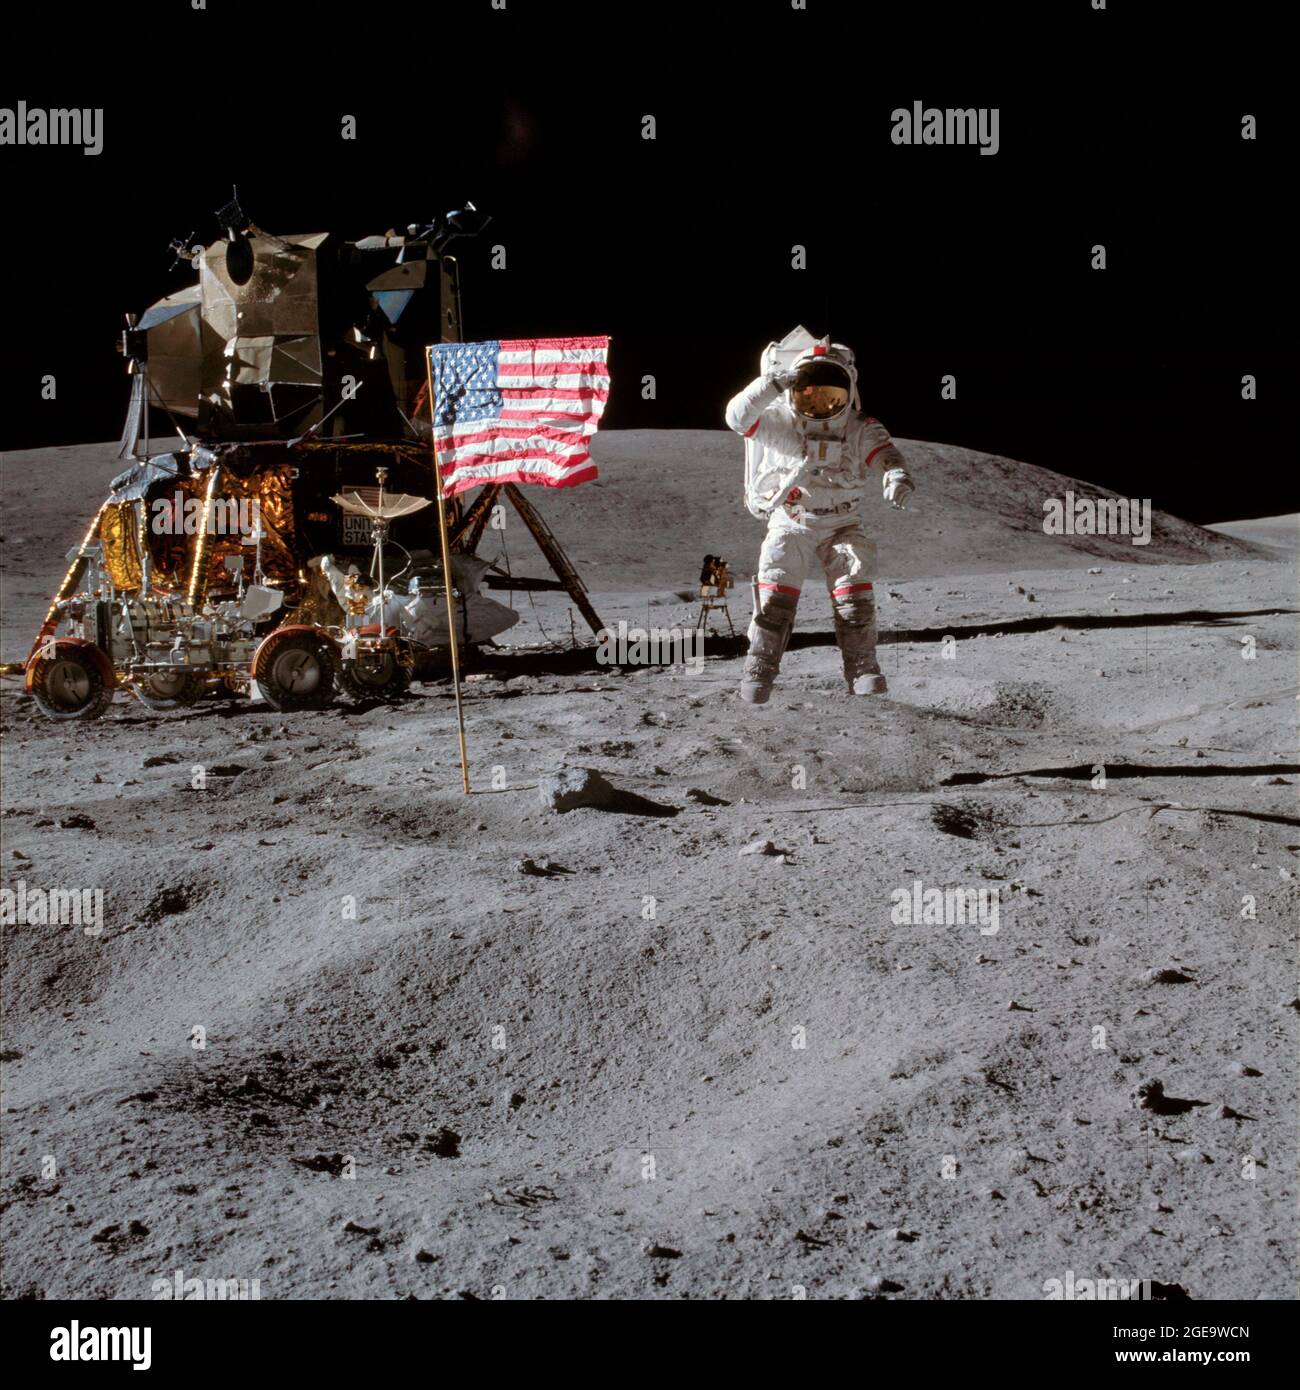 Astronaut John W. Young, commander of the Apollo 16 lunar landing mission, leaps from the lunar surface as he salutes the United States flag at the Descartes landing site during the first Apollo 16 extravehicular activity (EVA). Astronaut Charles M. Duke Jr., lunar module pilot, took this picture. The Lunar Module (LM) 'Orion' is on the left. The Lunar Roving Vehicle (LRV) is parked beside the LM. The object behind Young (in the shade of the LM) is the Far Ultraviolet Camera/Spectrograph (FUC/S). Stone Mountain dominates the background in this lunar scene. Stock Photo